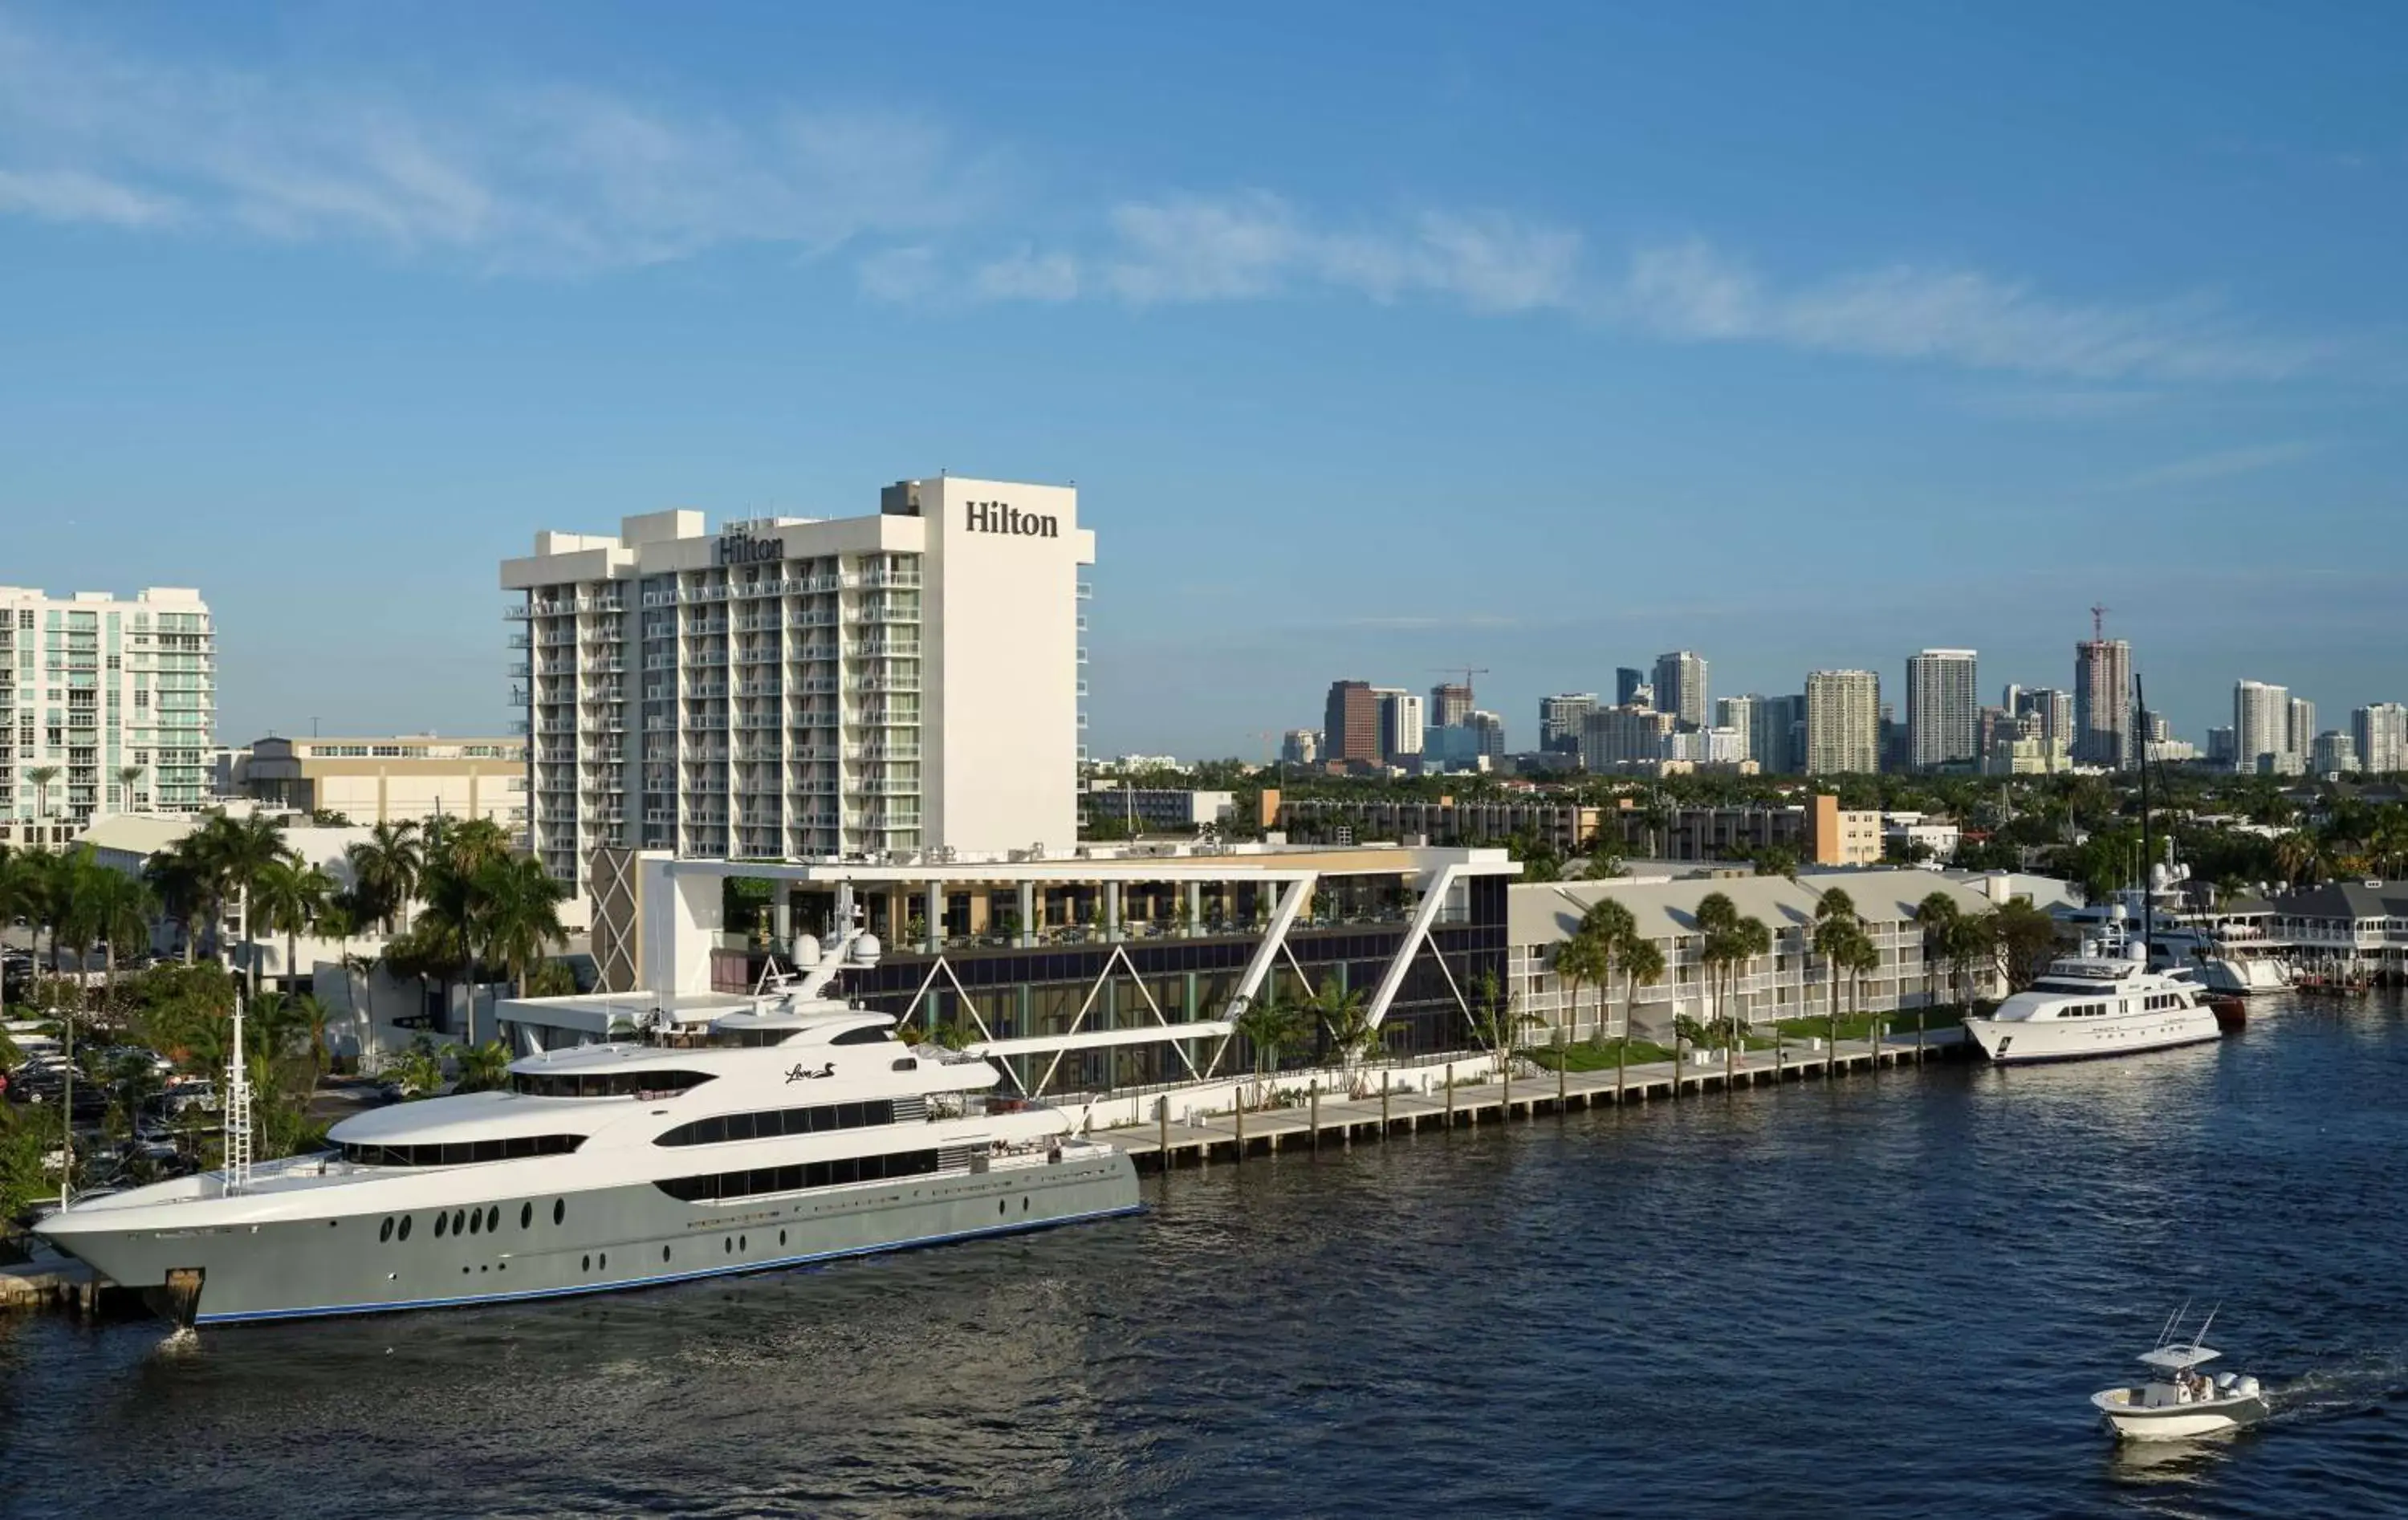 Property building in Hilton Fort Lauderdale Marina